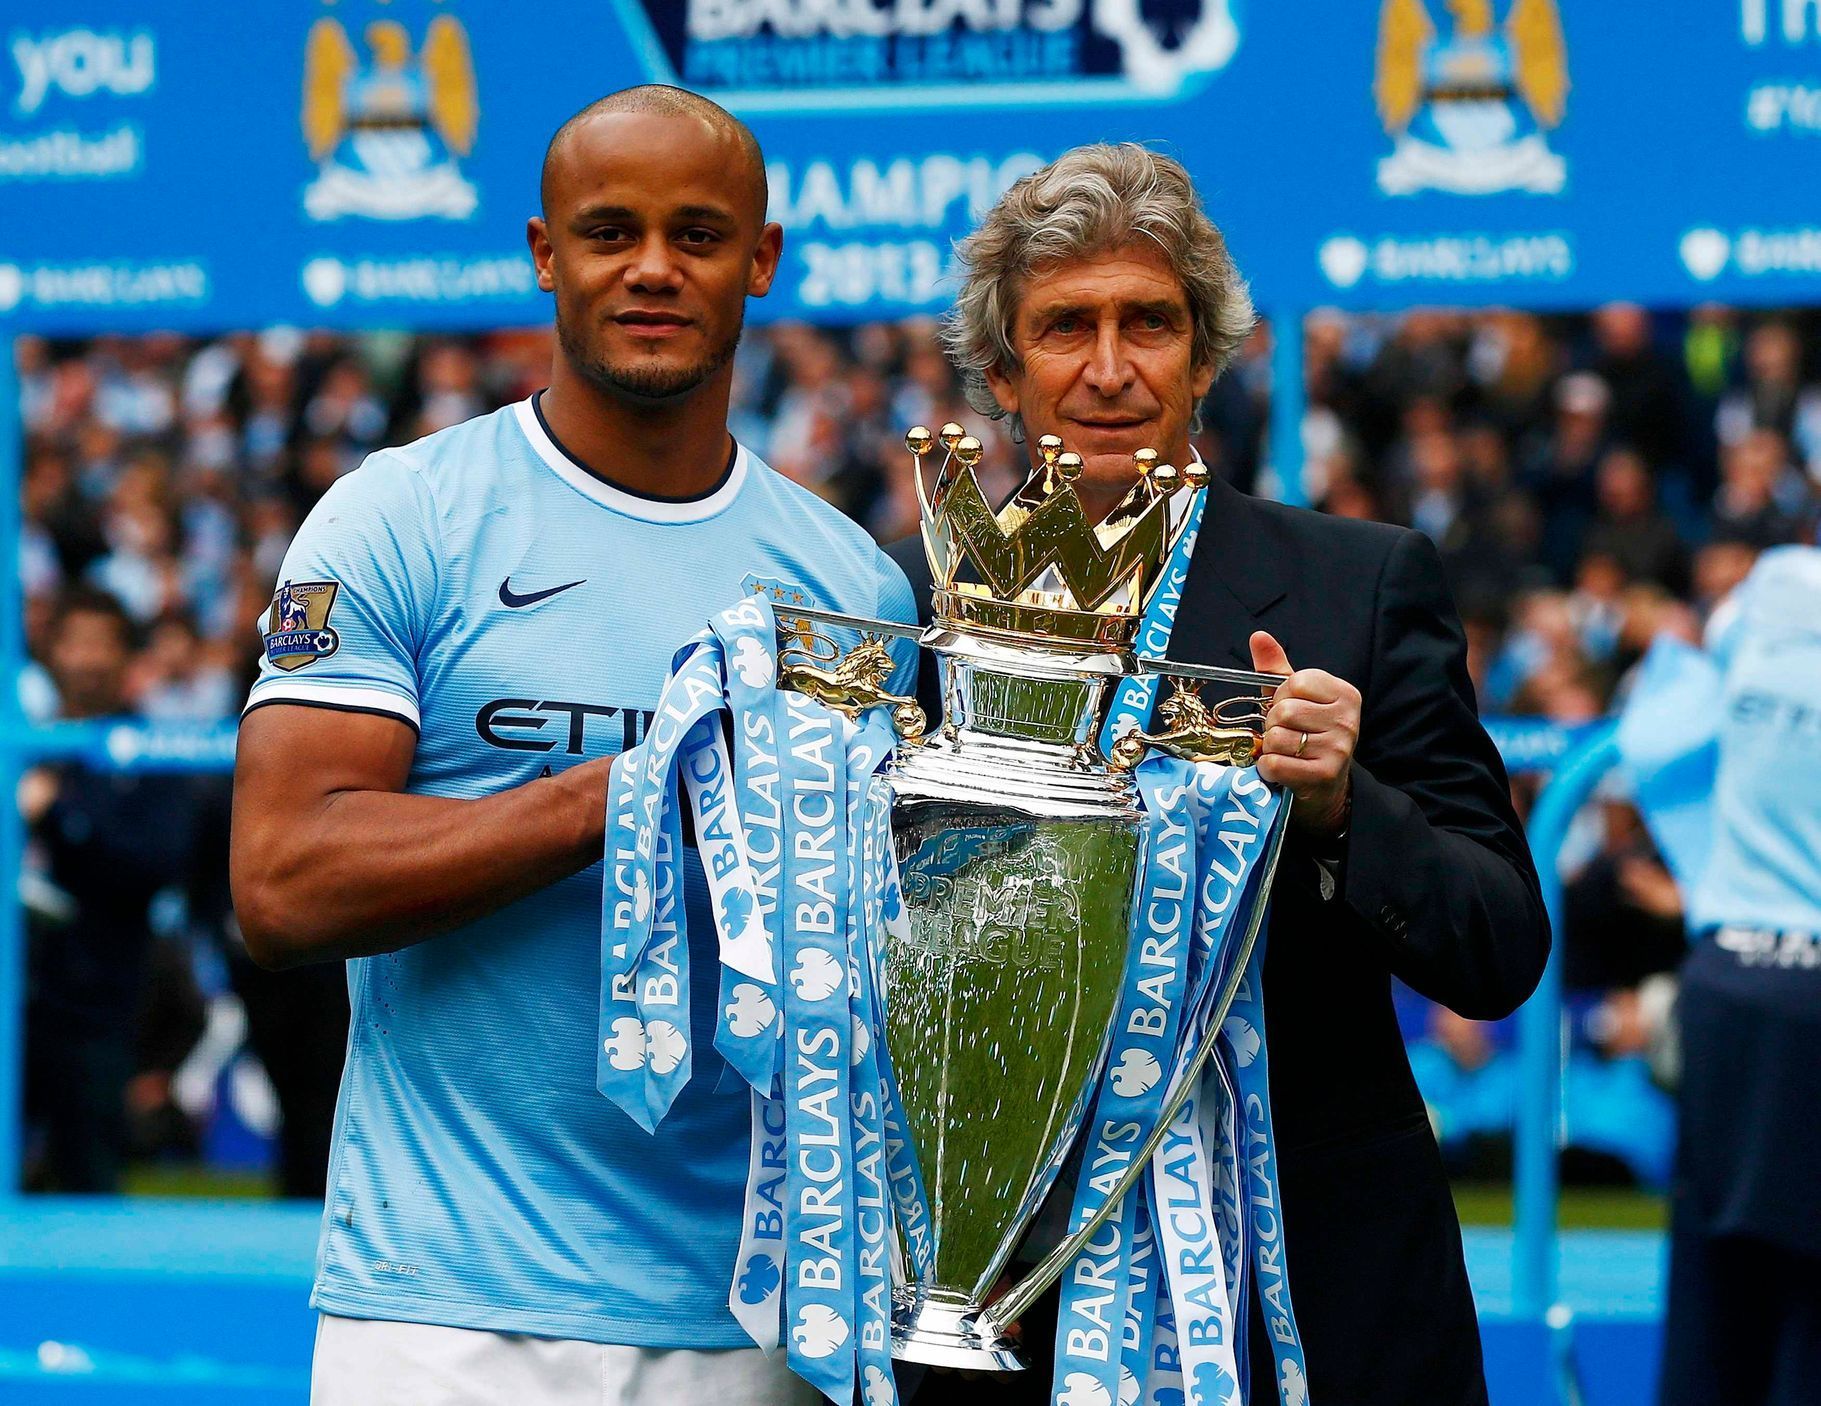 Manchester City's Kompany and manager Manuel Pellegrini pose for pictures with the English Premier League trophy following their soccer match against West Ham United at the Etihad Stadium in Mancheste